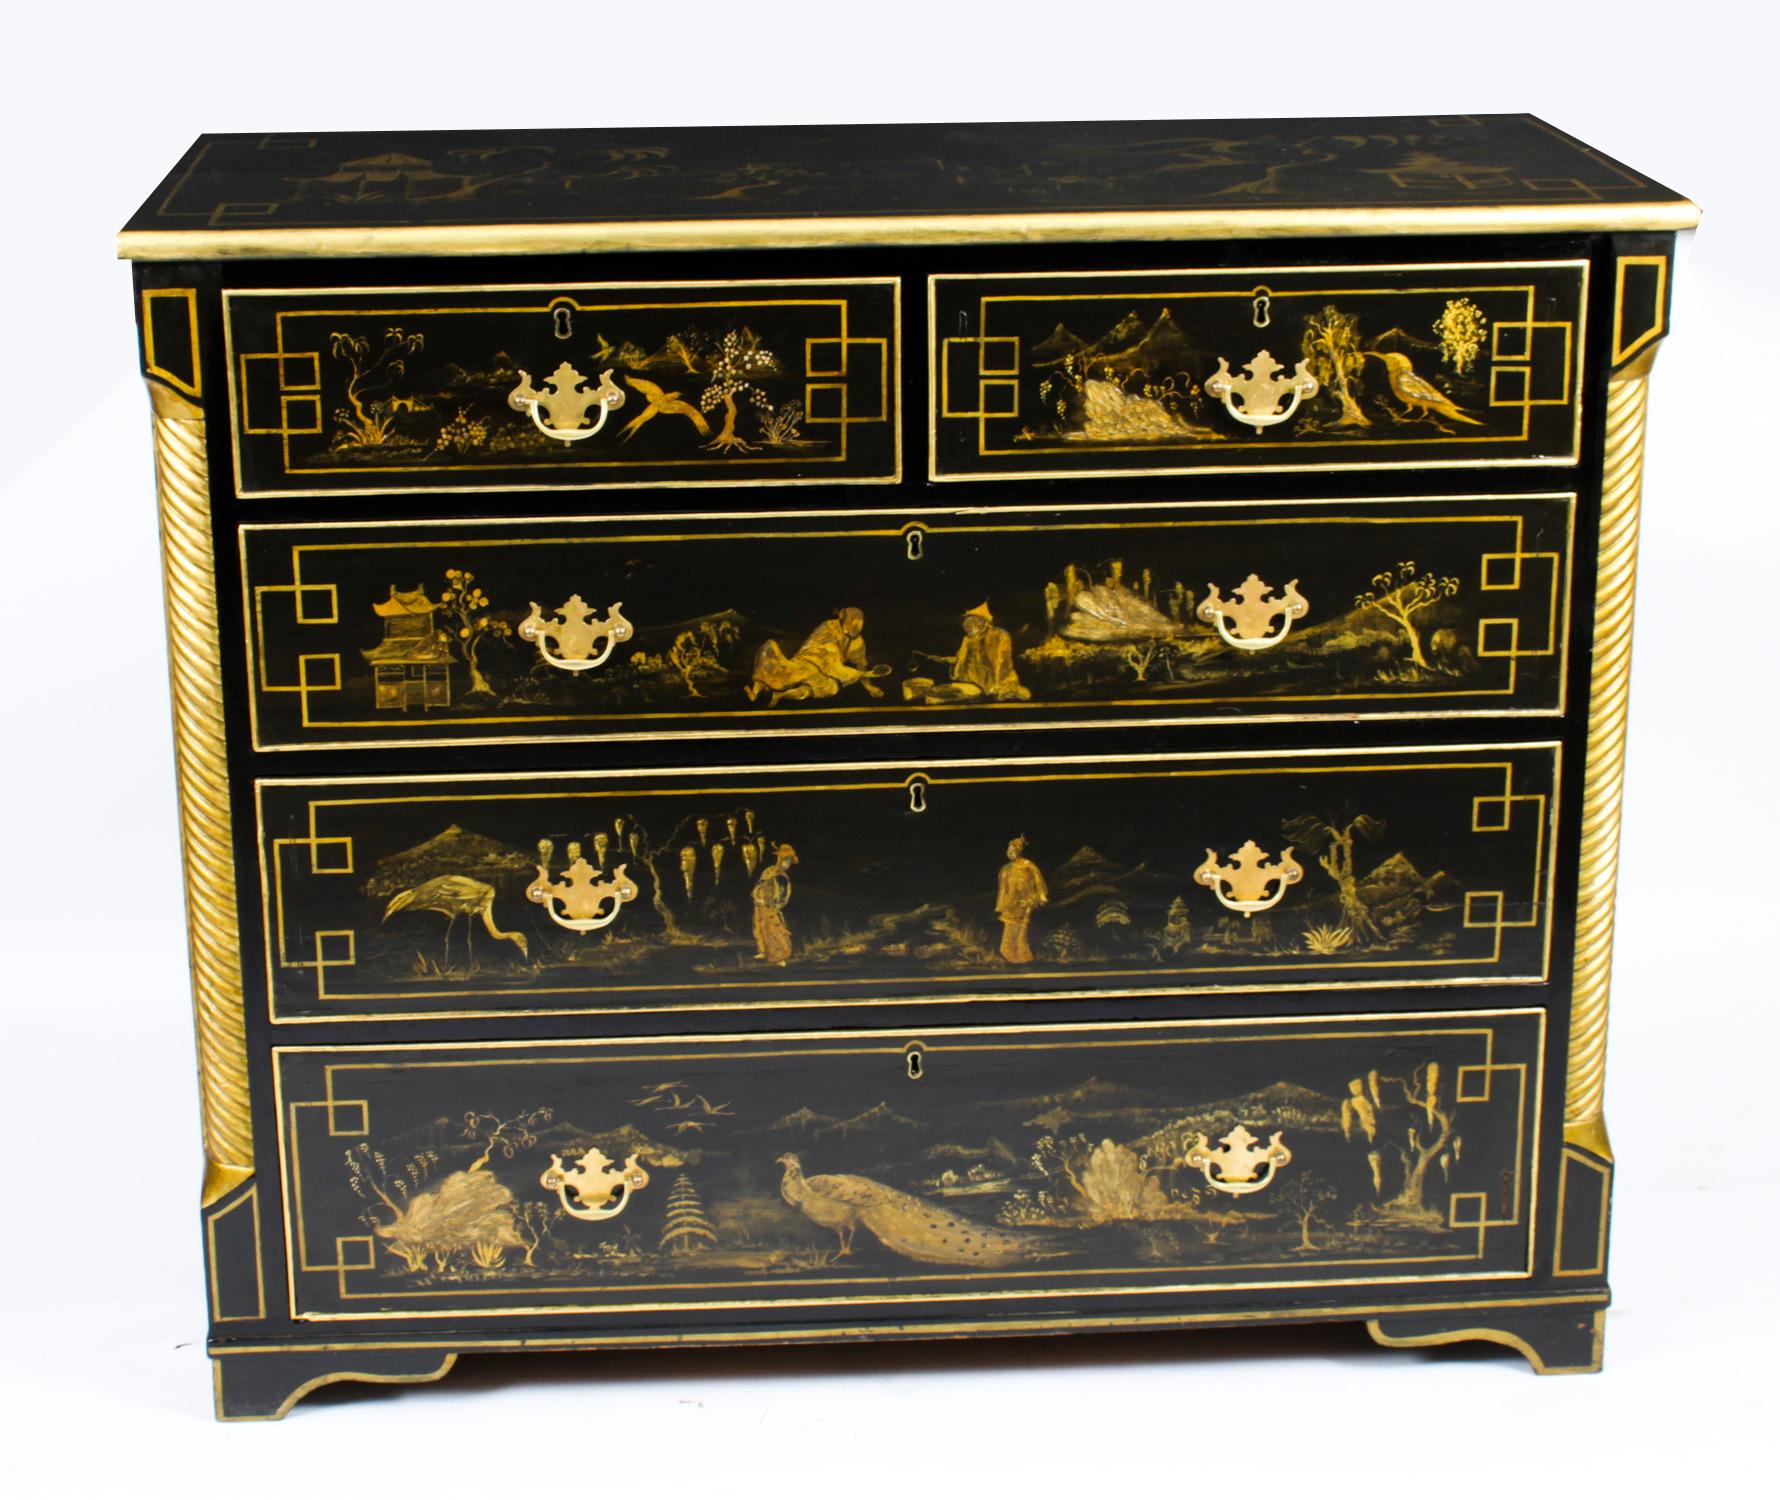 This is a stunning antique Georgian Chinoiserie black lacquered commode, circa 1825 in date.

A pair of twisted scalloped columns frame two short drawers over three long all decorated with fabulous gilt Chinoiserie decoration in the form of